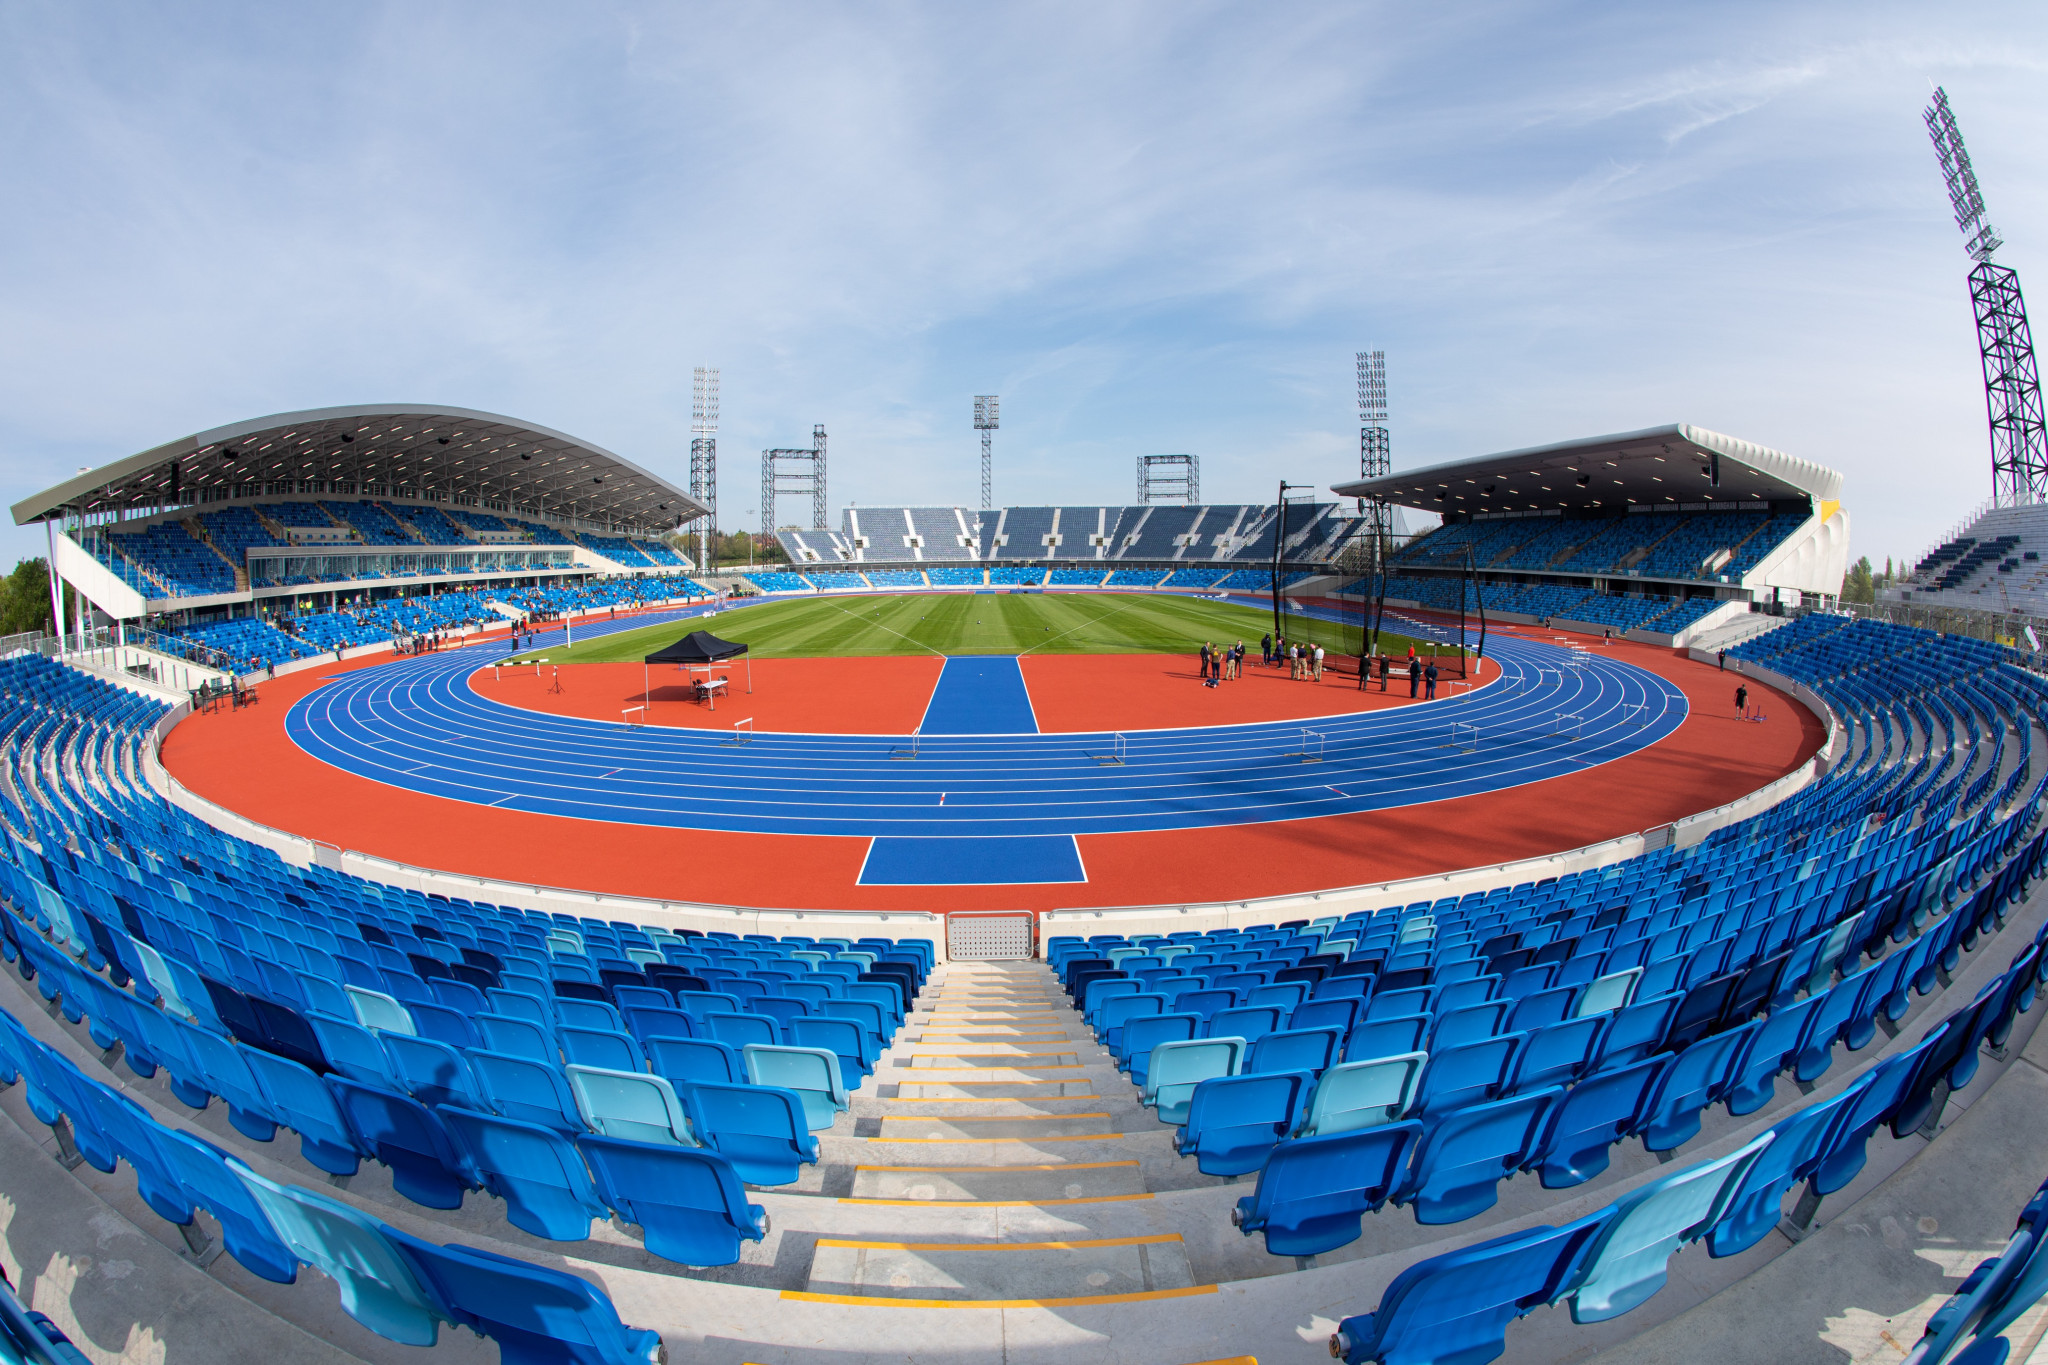 The Alexander Stadium has been put forward as Birmingham's potential venue for the 2026 European Athletics Championships ©Getty Images